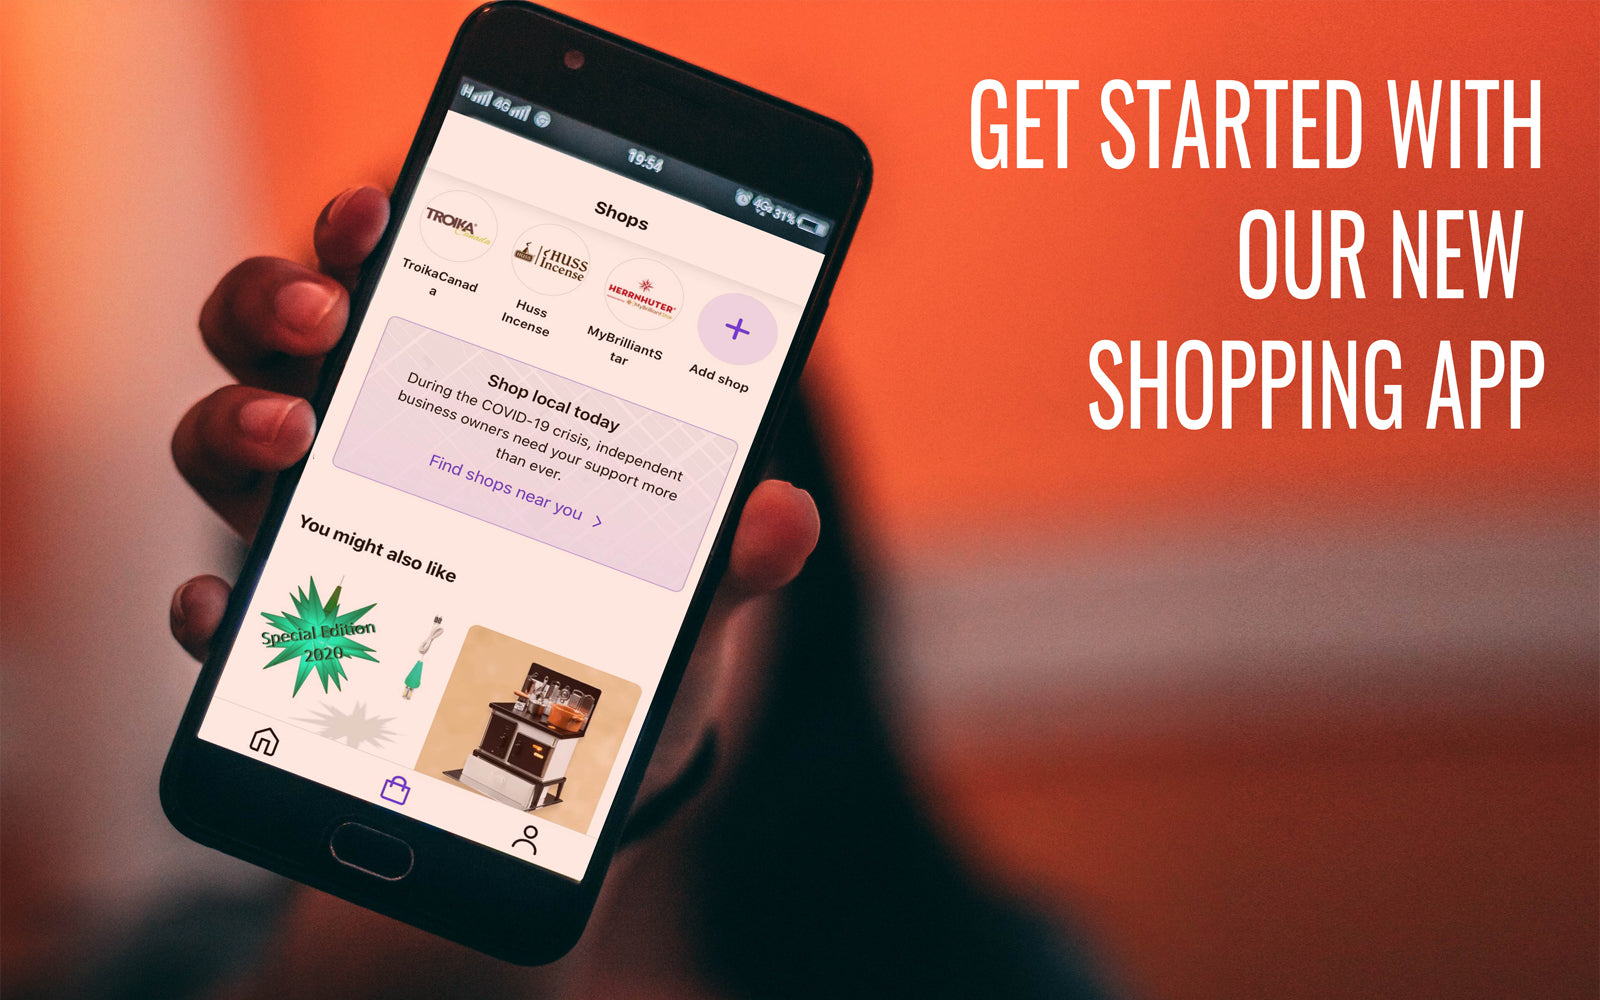 SHOP - THE NEW SHOPPING APP